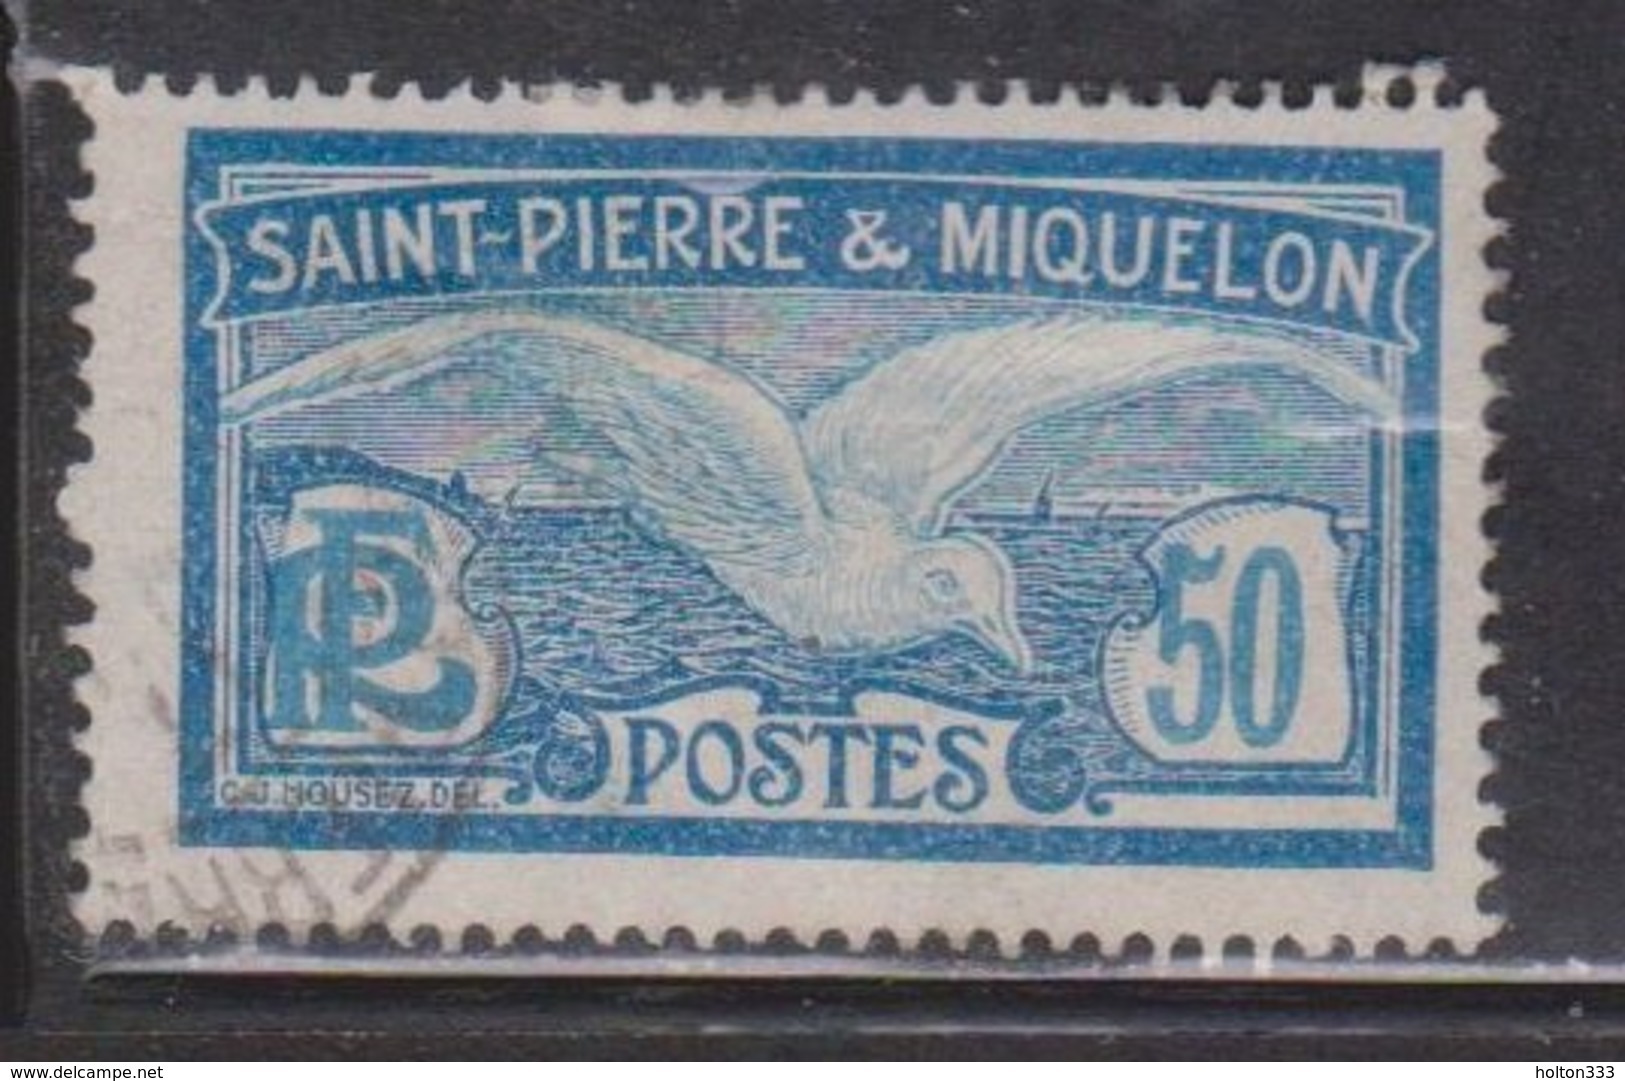 ST PIERRE ET MIQUELON Scott # 98 Used - Seagull - Used Stamps